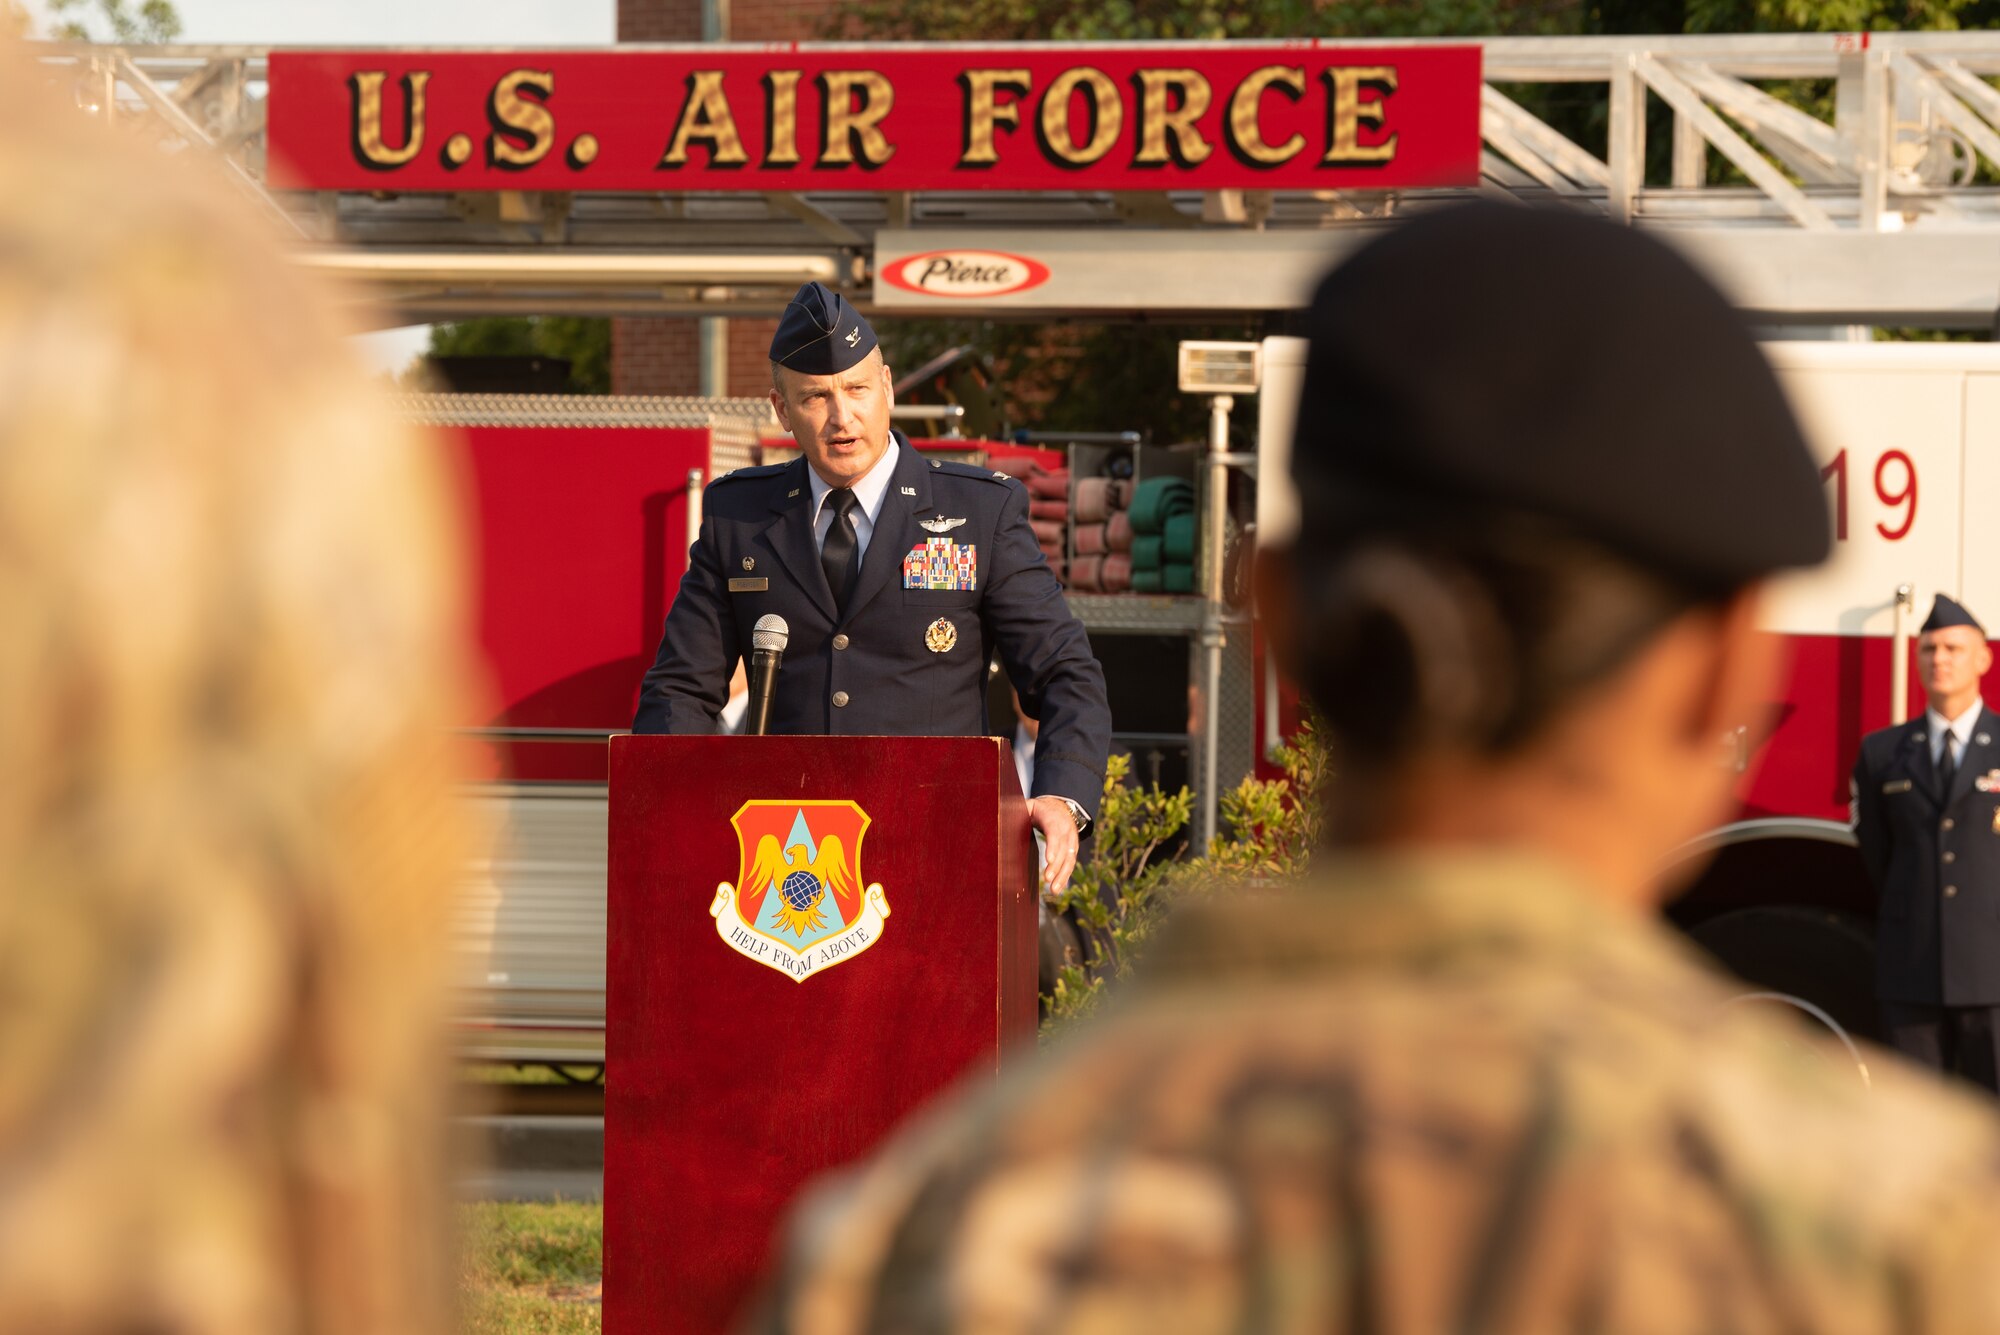 U.S. Air Force Col. Christopher Robinson, 375th Air Mobility Wing commander, addresses Airmen  during the 9/11 remembrance ceremony on Scott Air Force Base, Illinois, September 10, 2021. Military members, first responders and friends and family of Team Scott gathered to pay their respects and remember the lives lost during the terrorist attacks on September 11, 2001.(U.S. Air Force photo by Airman 1st Class Stephanie Henry)